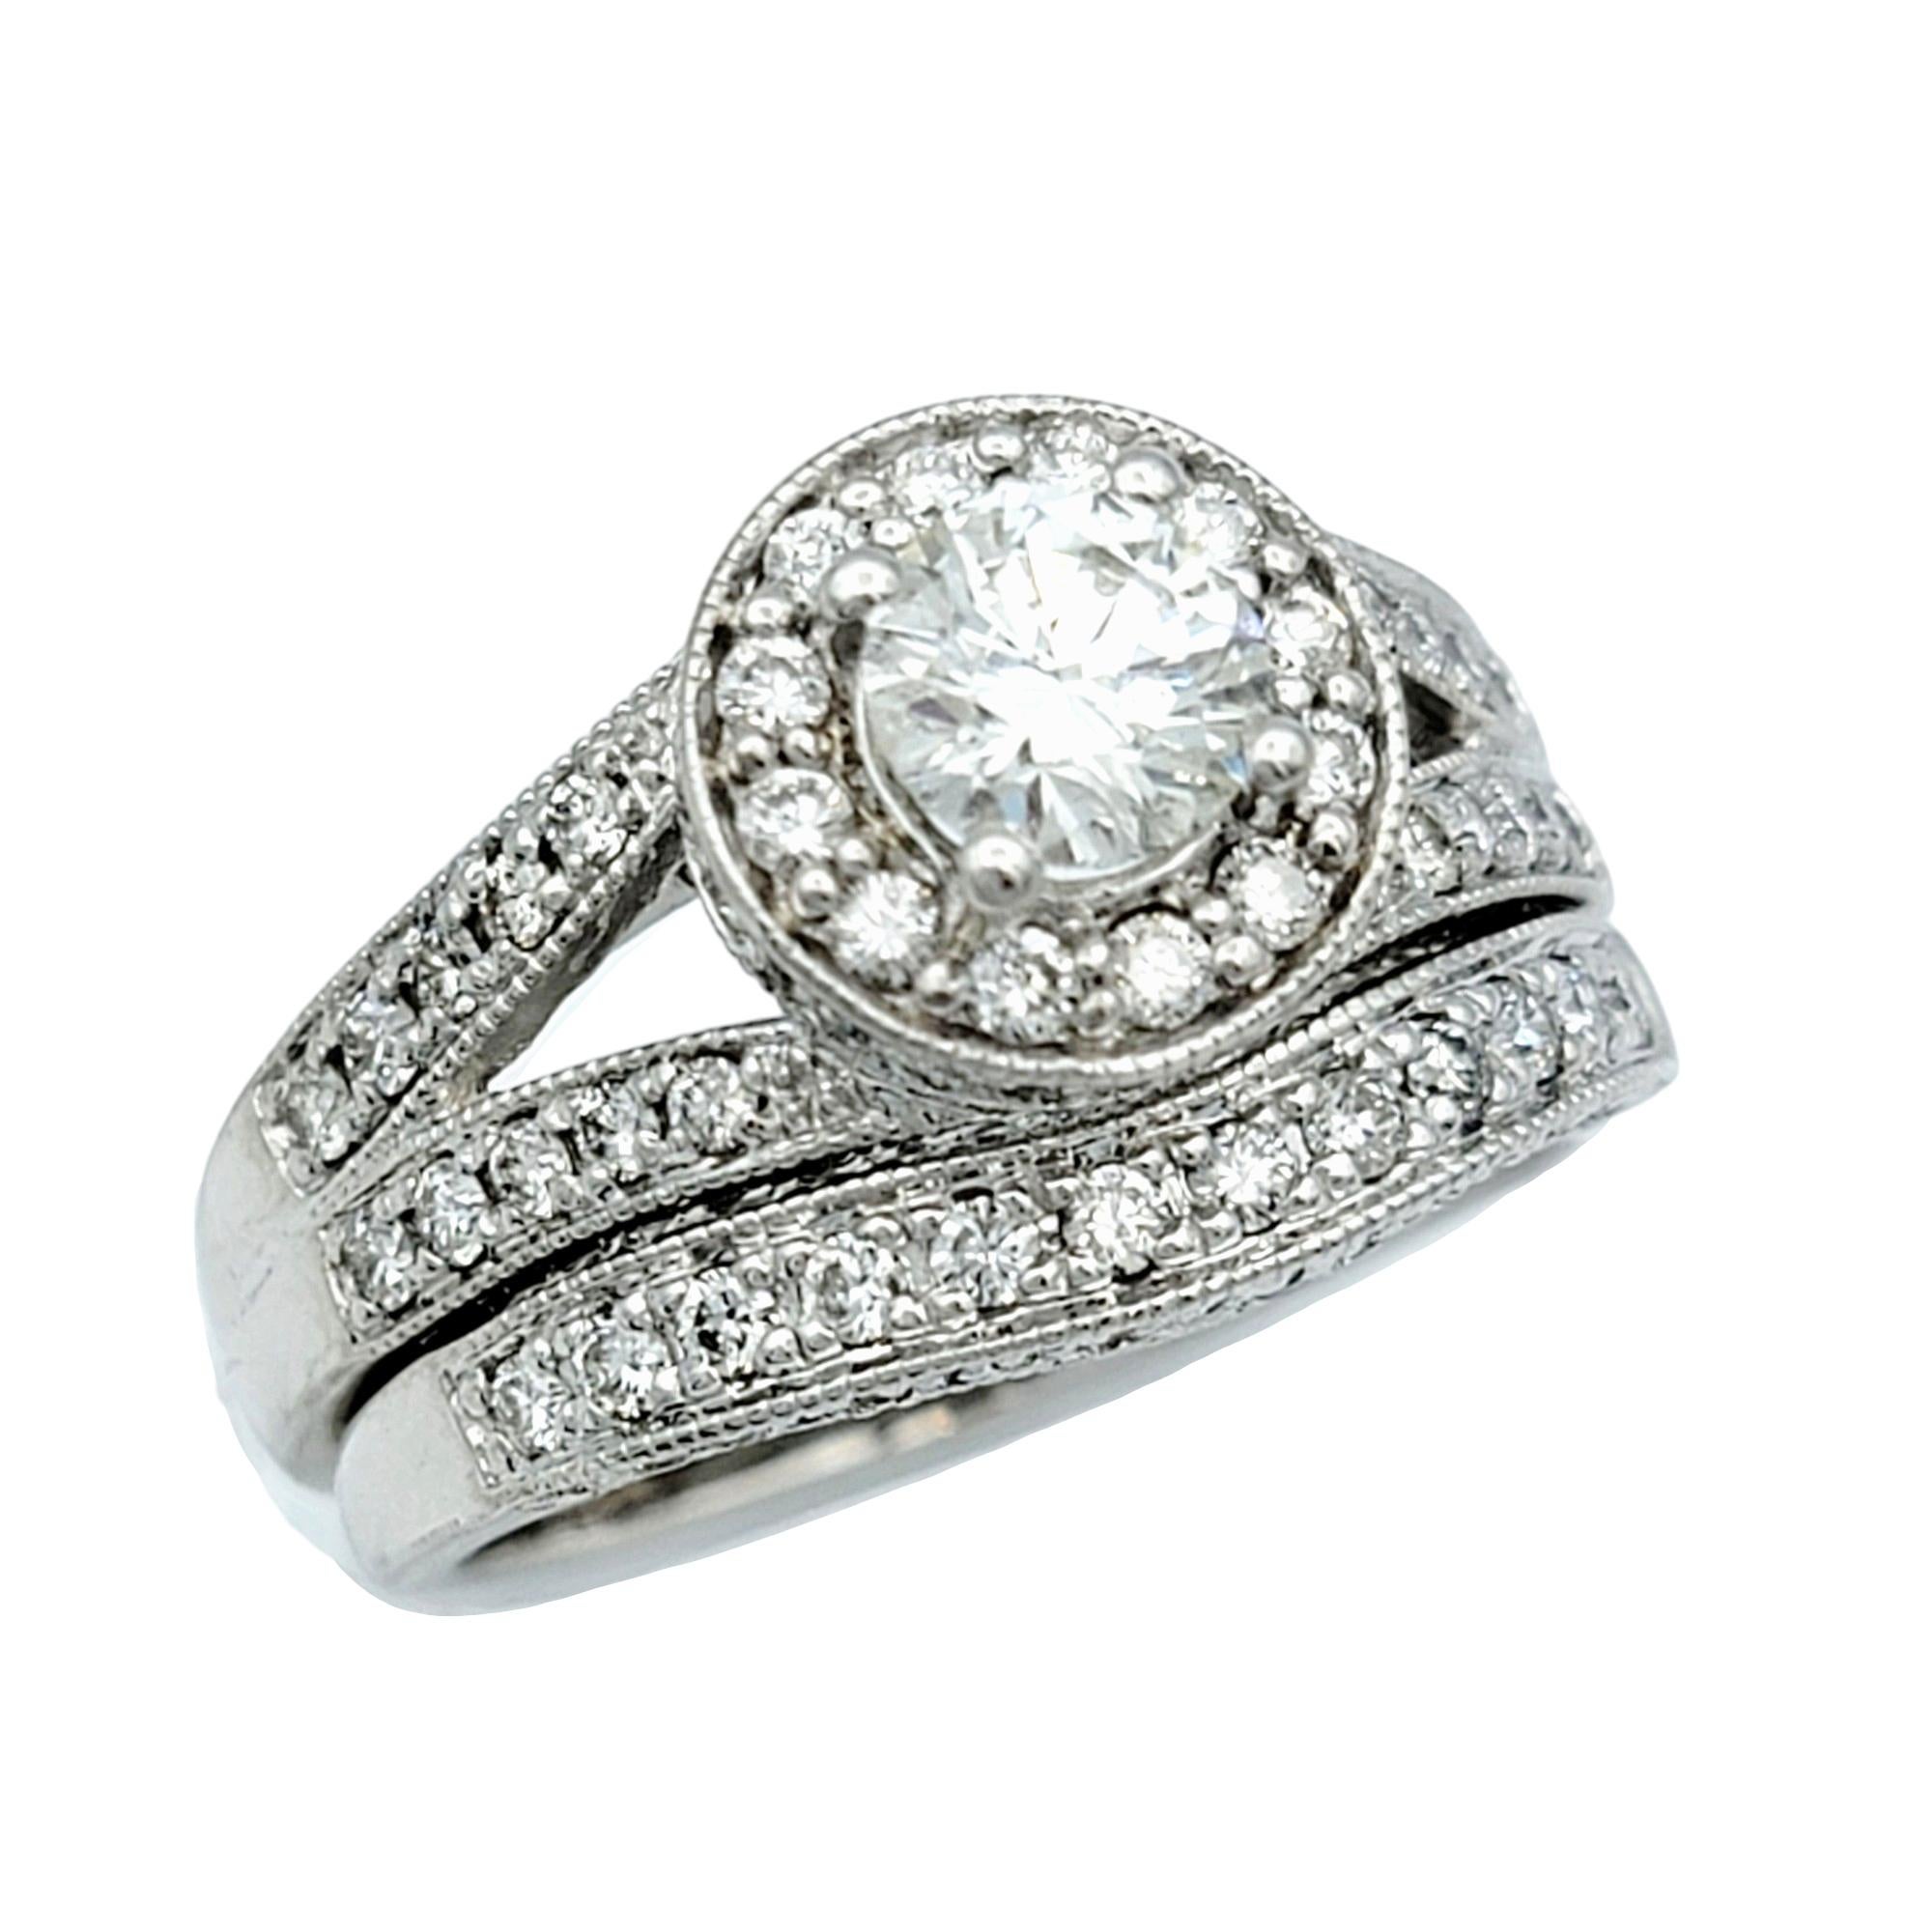 Ring Size: 7

This breathtaking round diamond engagement ring and wedding band set, crafted in elegant 14 karat white gold, is a stunning symbol of eternal love and commitment. At the heart of the main ring shines a .59 carat round brilliant